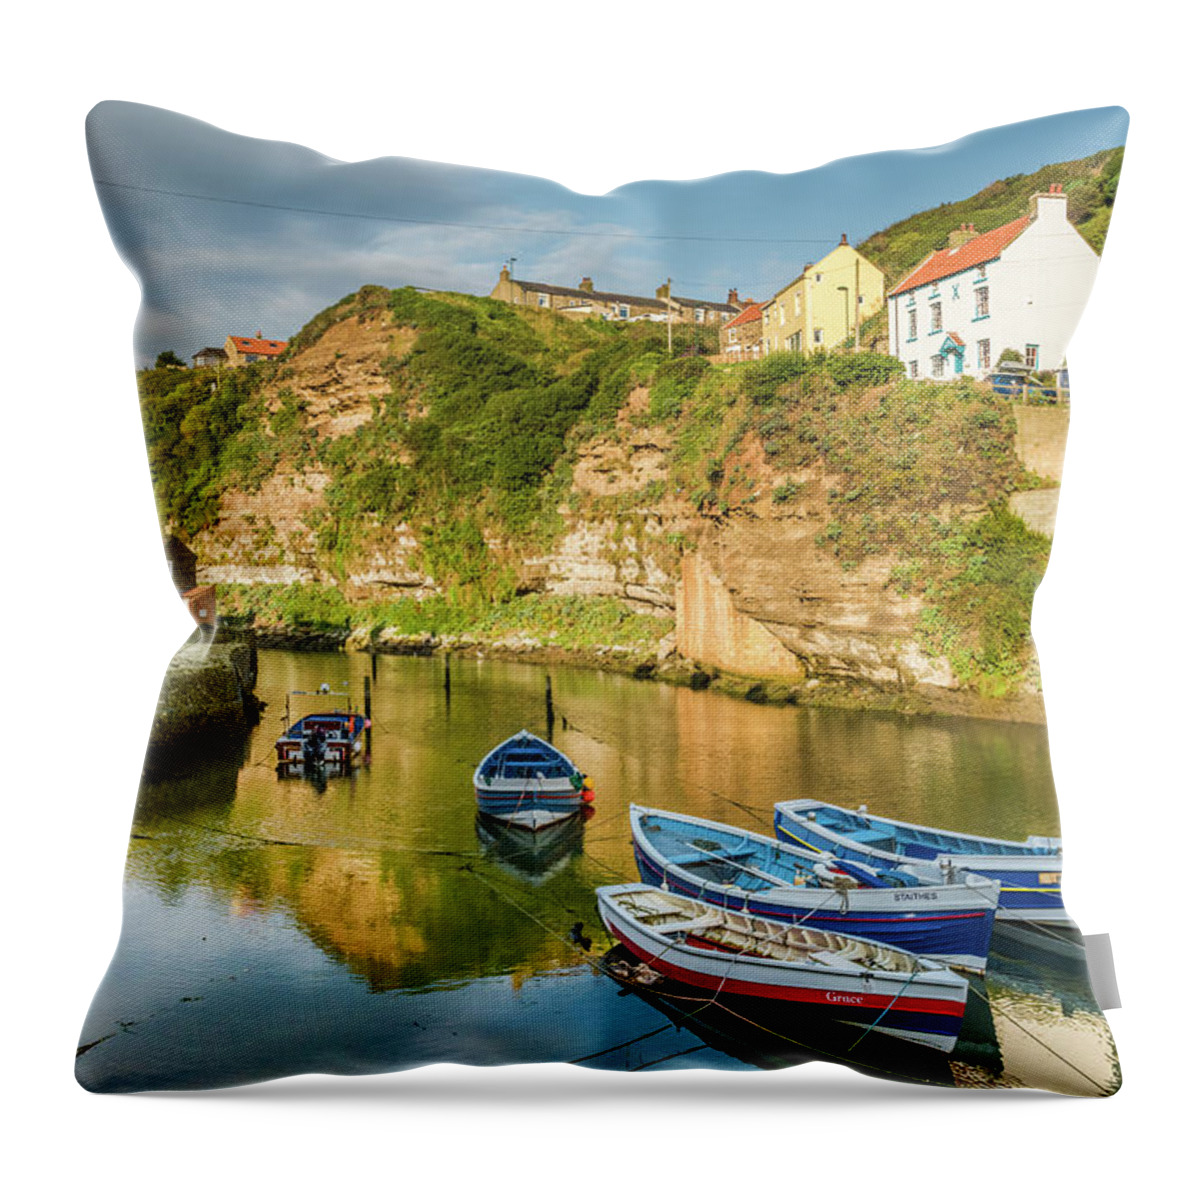 North Yorkshire Throw Pillow featuring the photograph Staithes, Yorkshire by David Ross